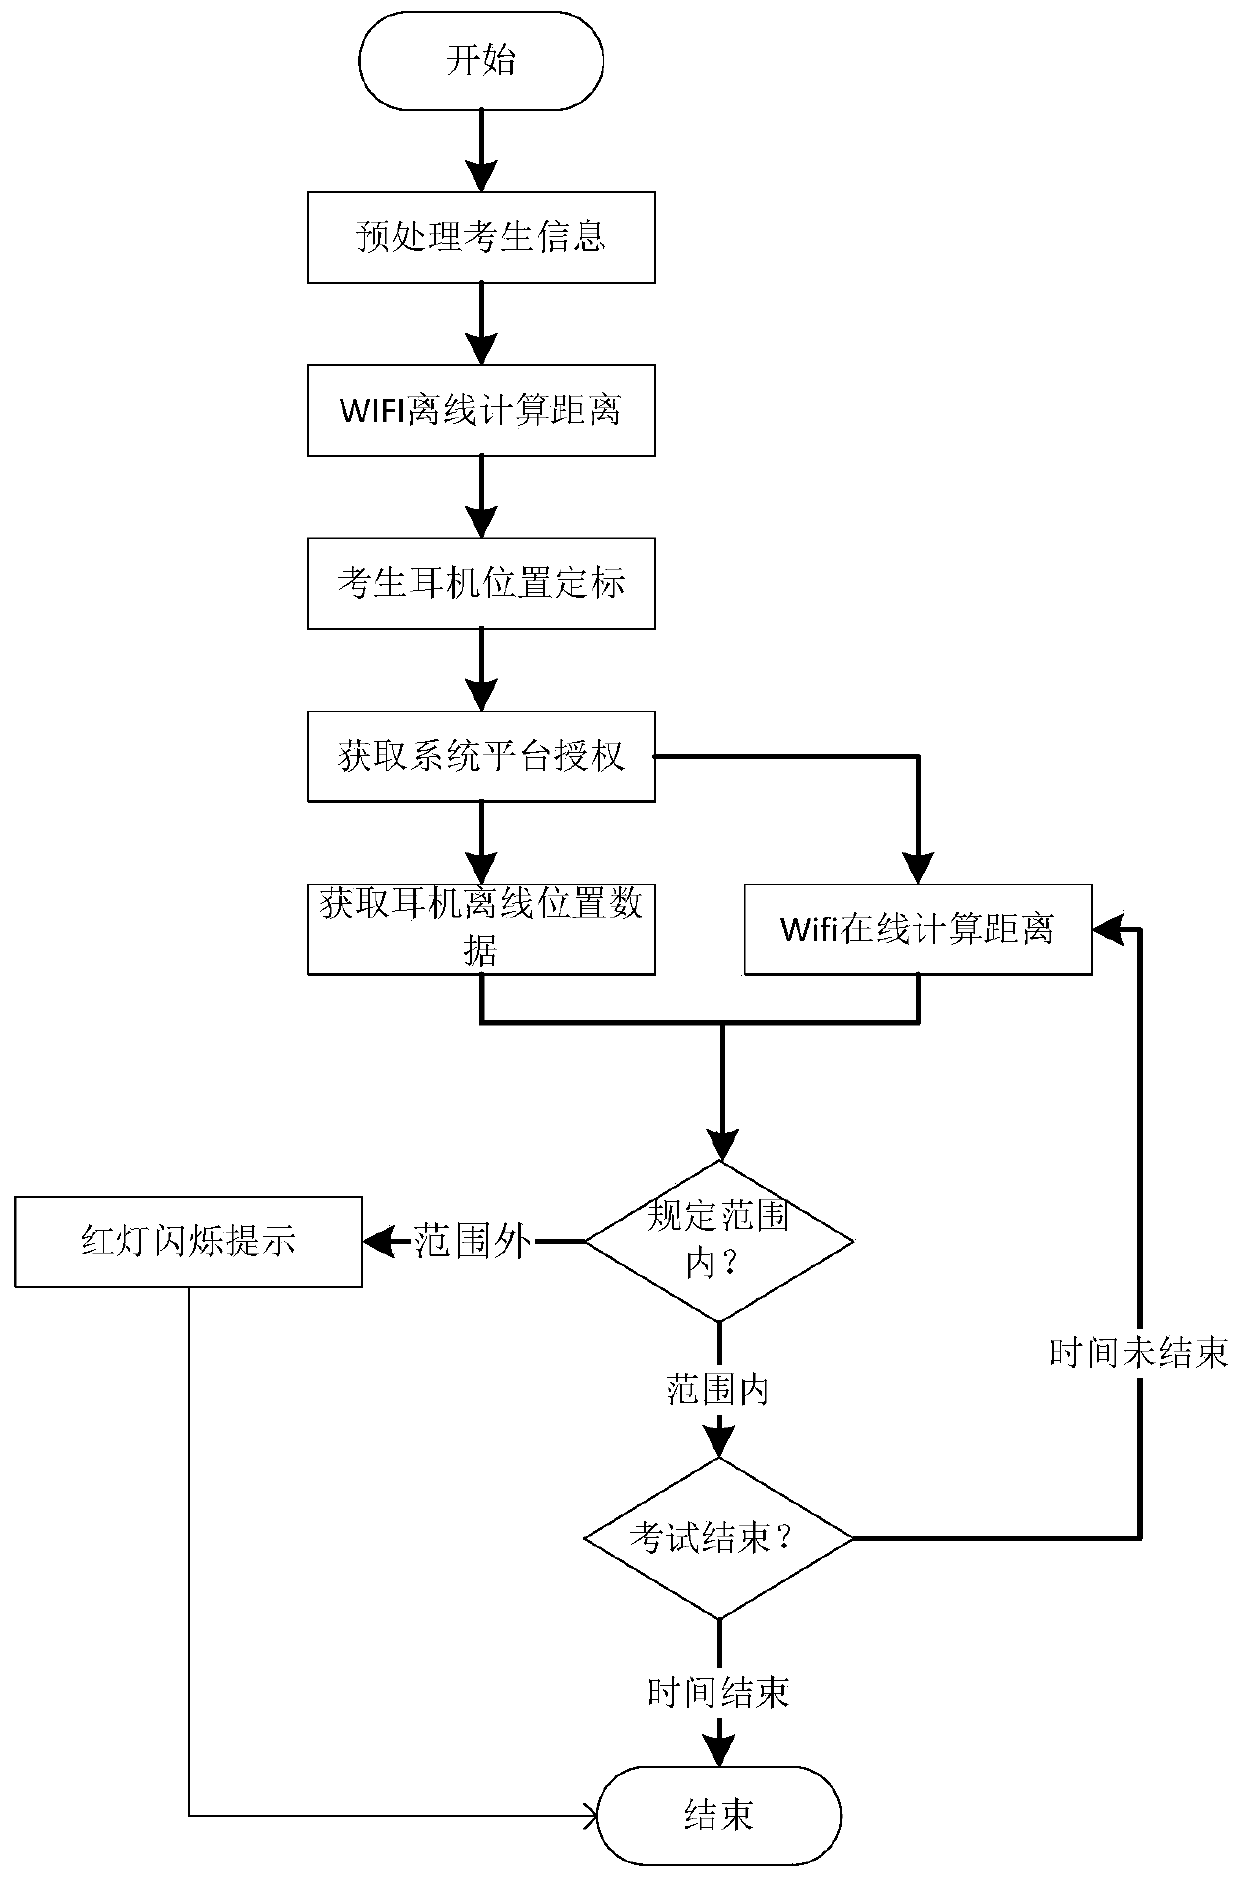 Method and system for positioning examinee positions to prevent cheating based on wifi